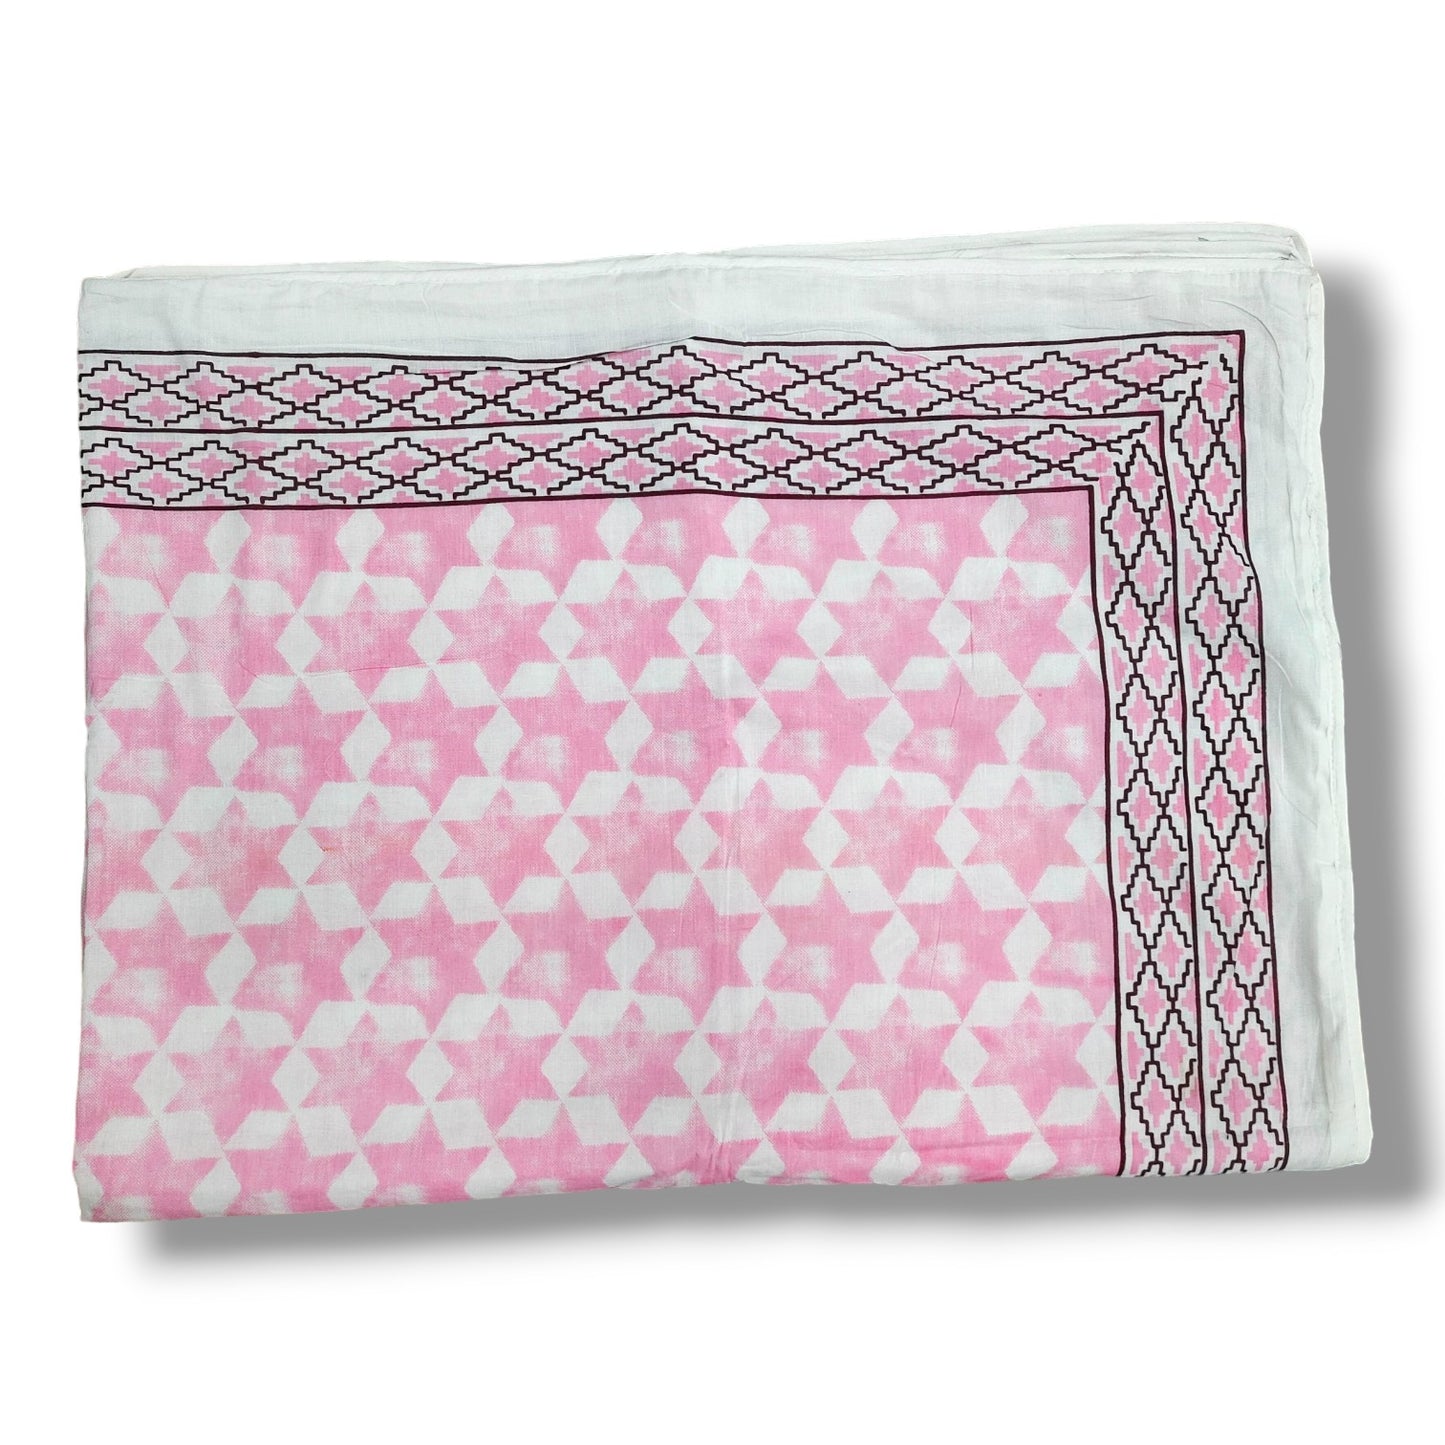 Malmal AC Quilt/Dohar-Starry pink -Single Bed